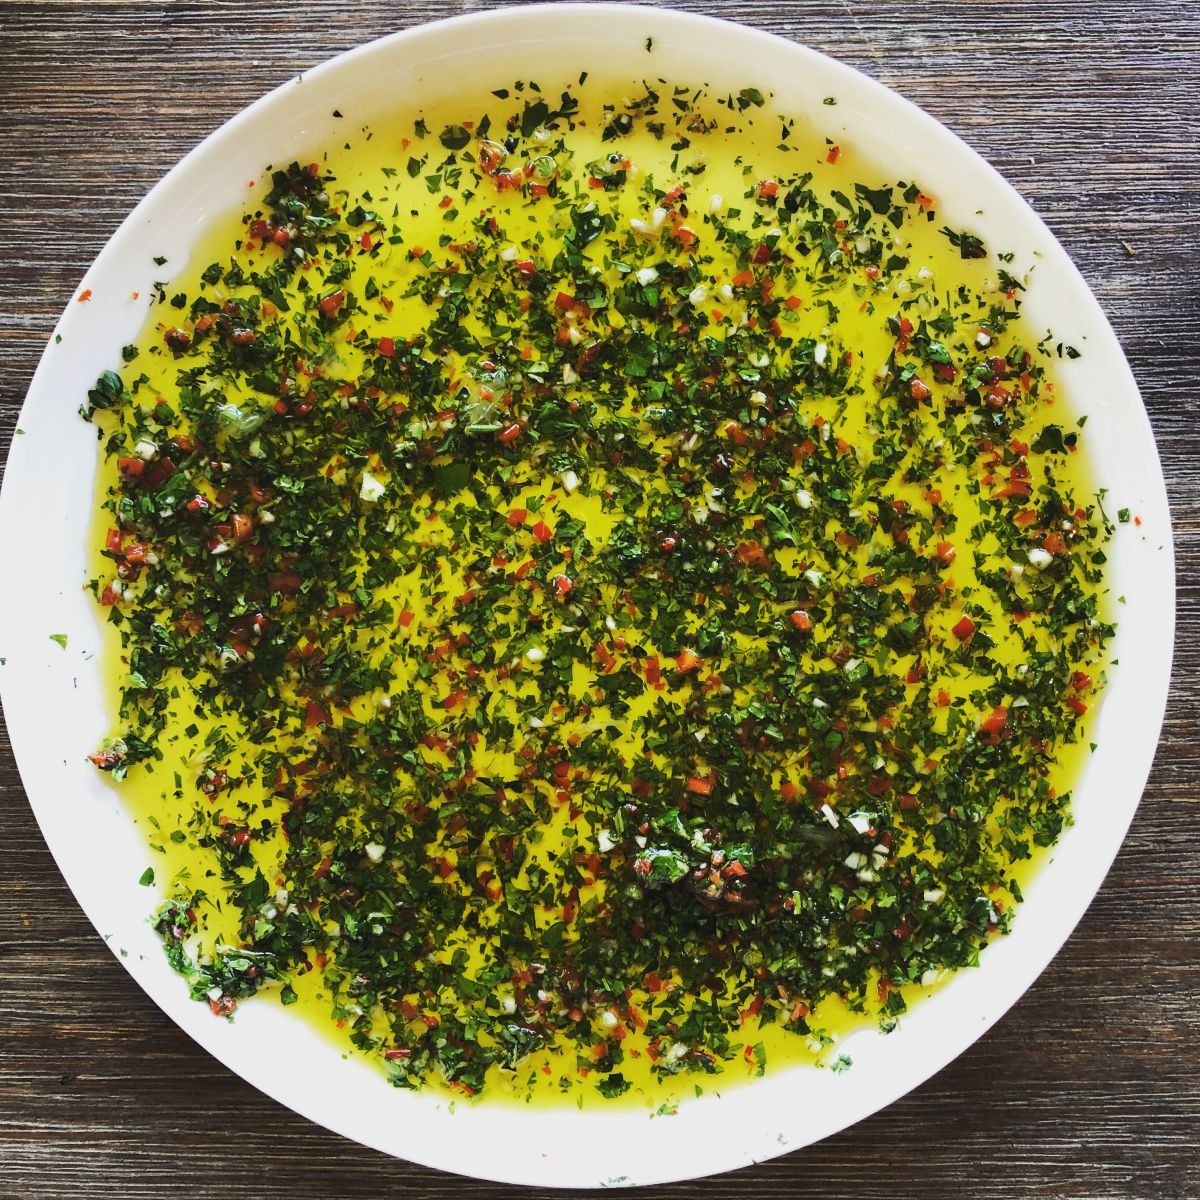 A fresh marinade of olive oil, herbs, chilli and salt and pepper in a large white bowl